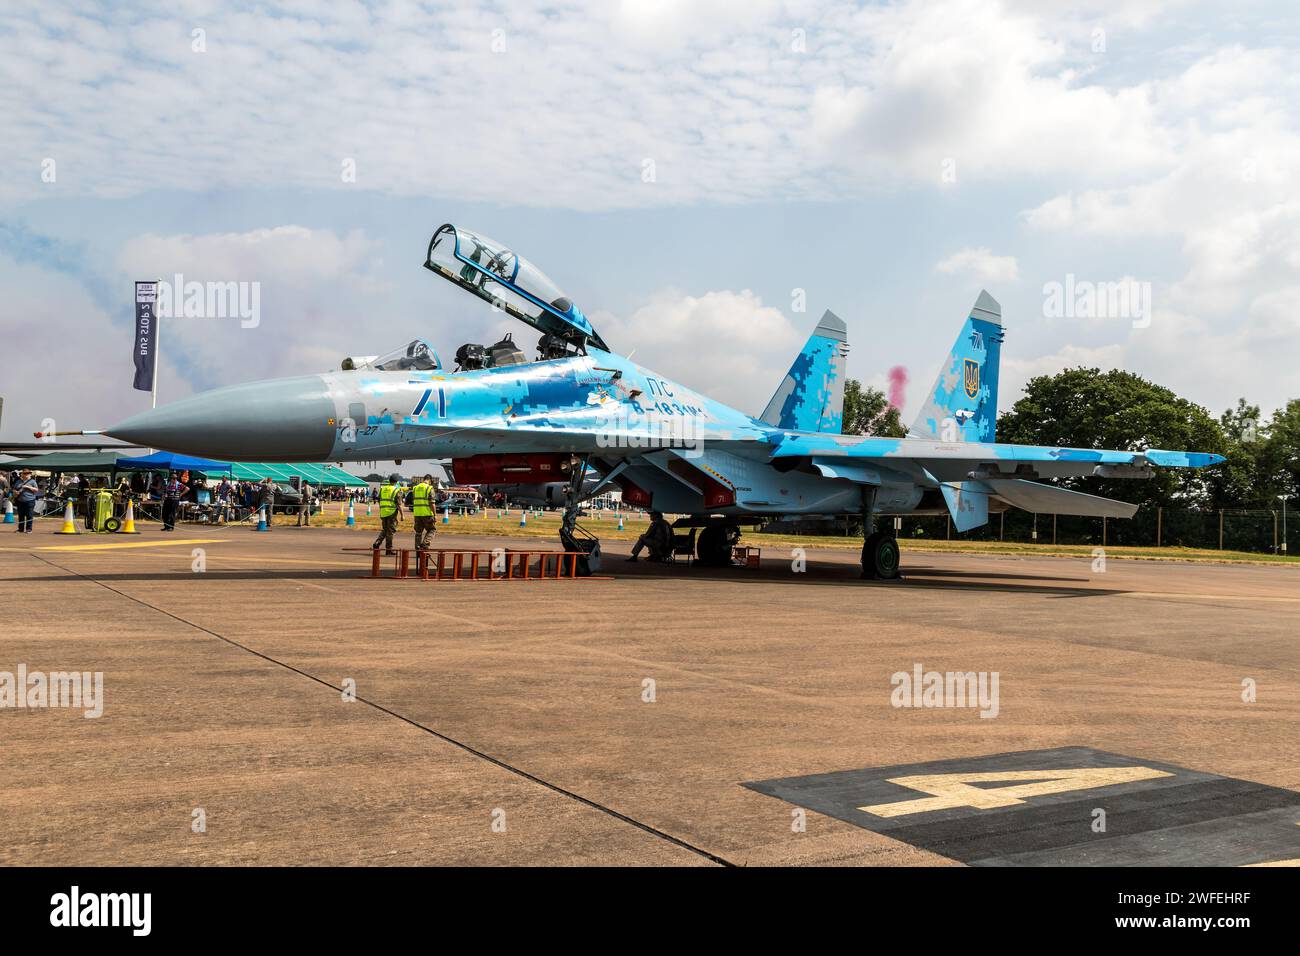 Ukrainian Air Force Sukhoi Su-27 Flanker fighter aircraft on the tarmac of RAF Fairford Airbase. UK - JUly 13, 2018 Stock Photo